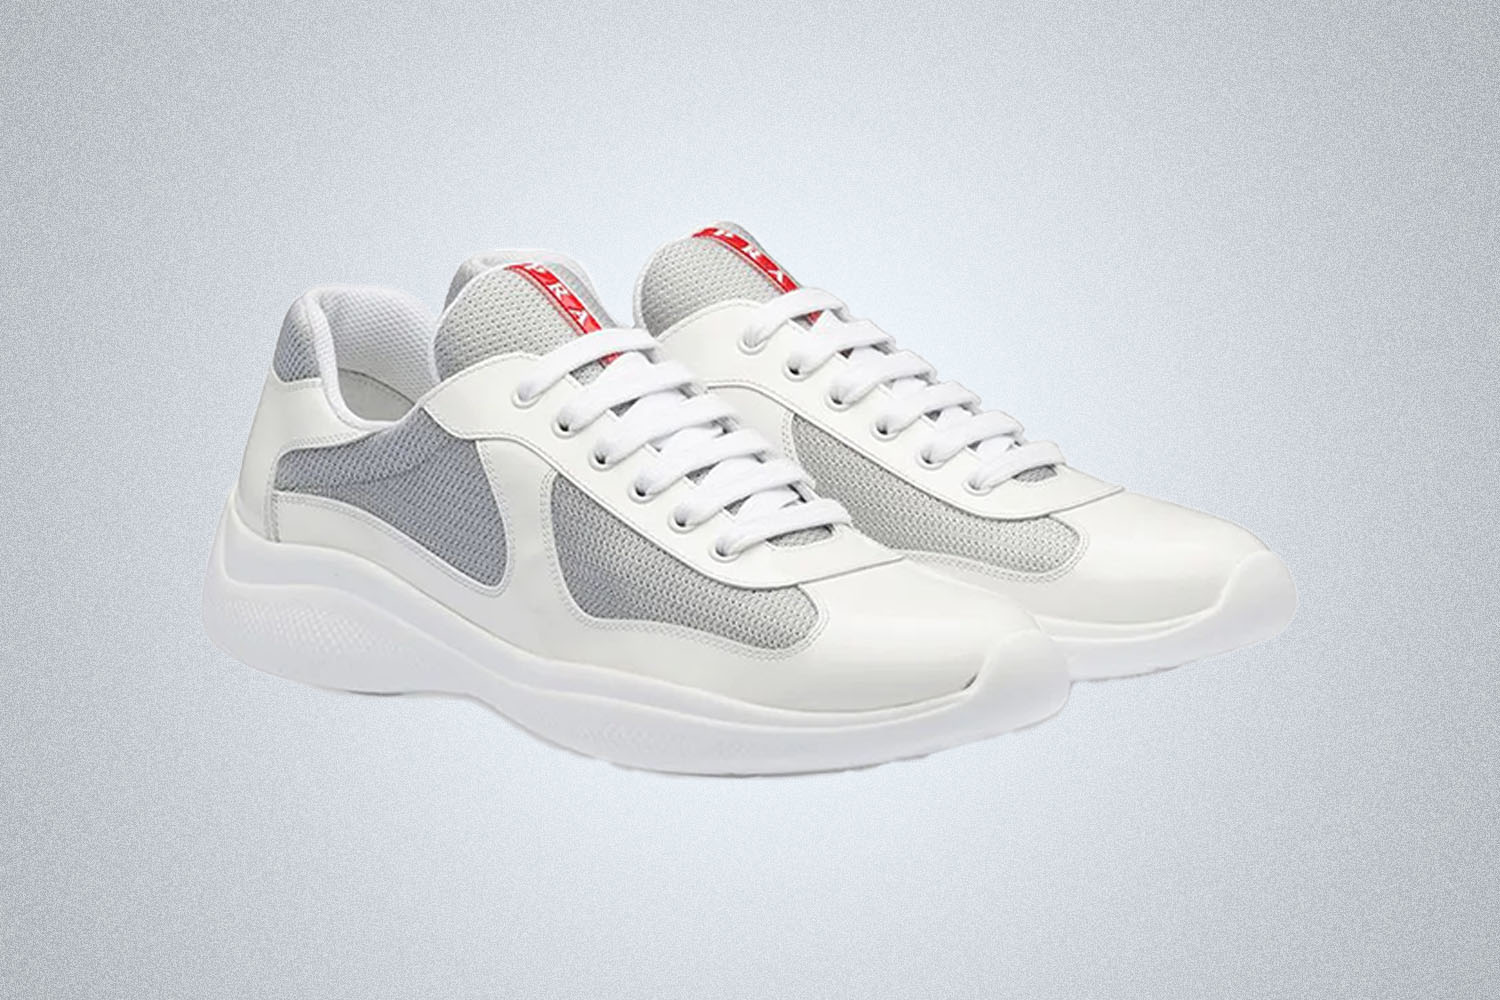 For the Guy With Money to Burn: Prada America’s Cup Leather Sneakers